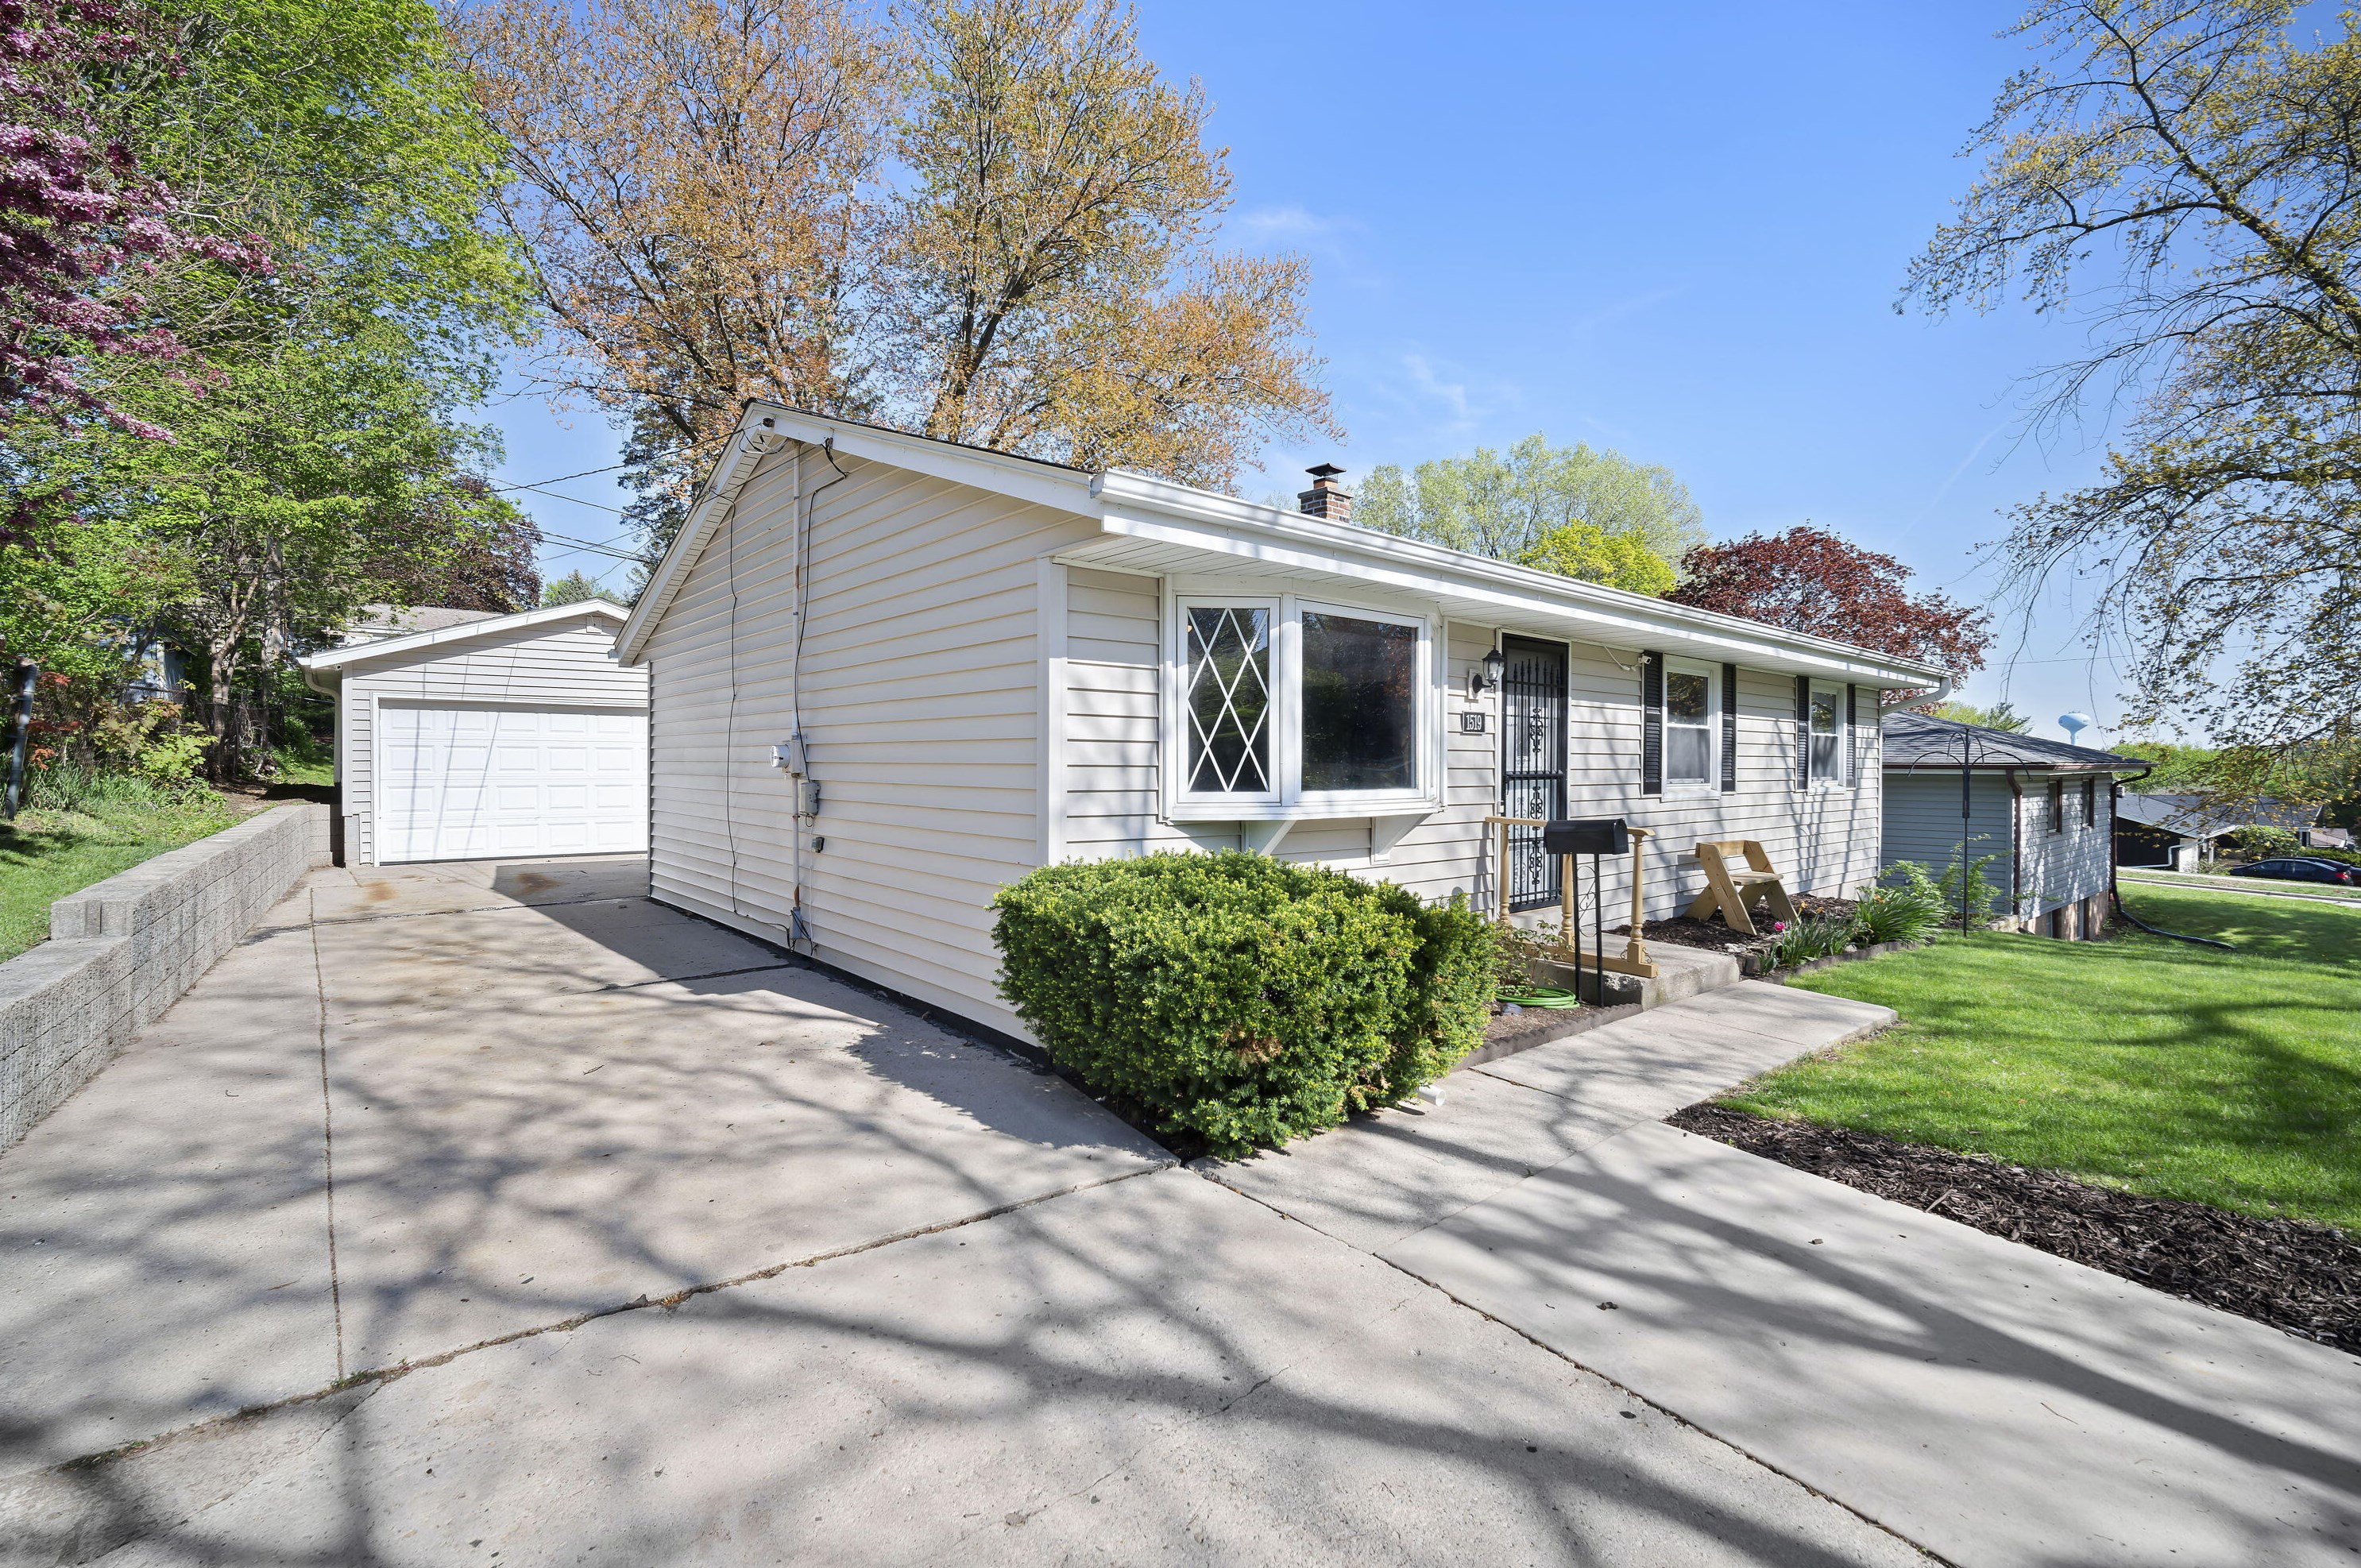 1519 N 12th Ave, West Bend, WI 53090